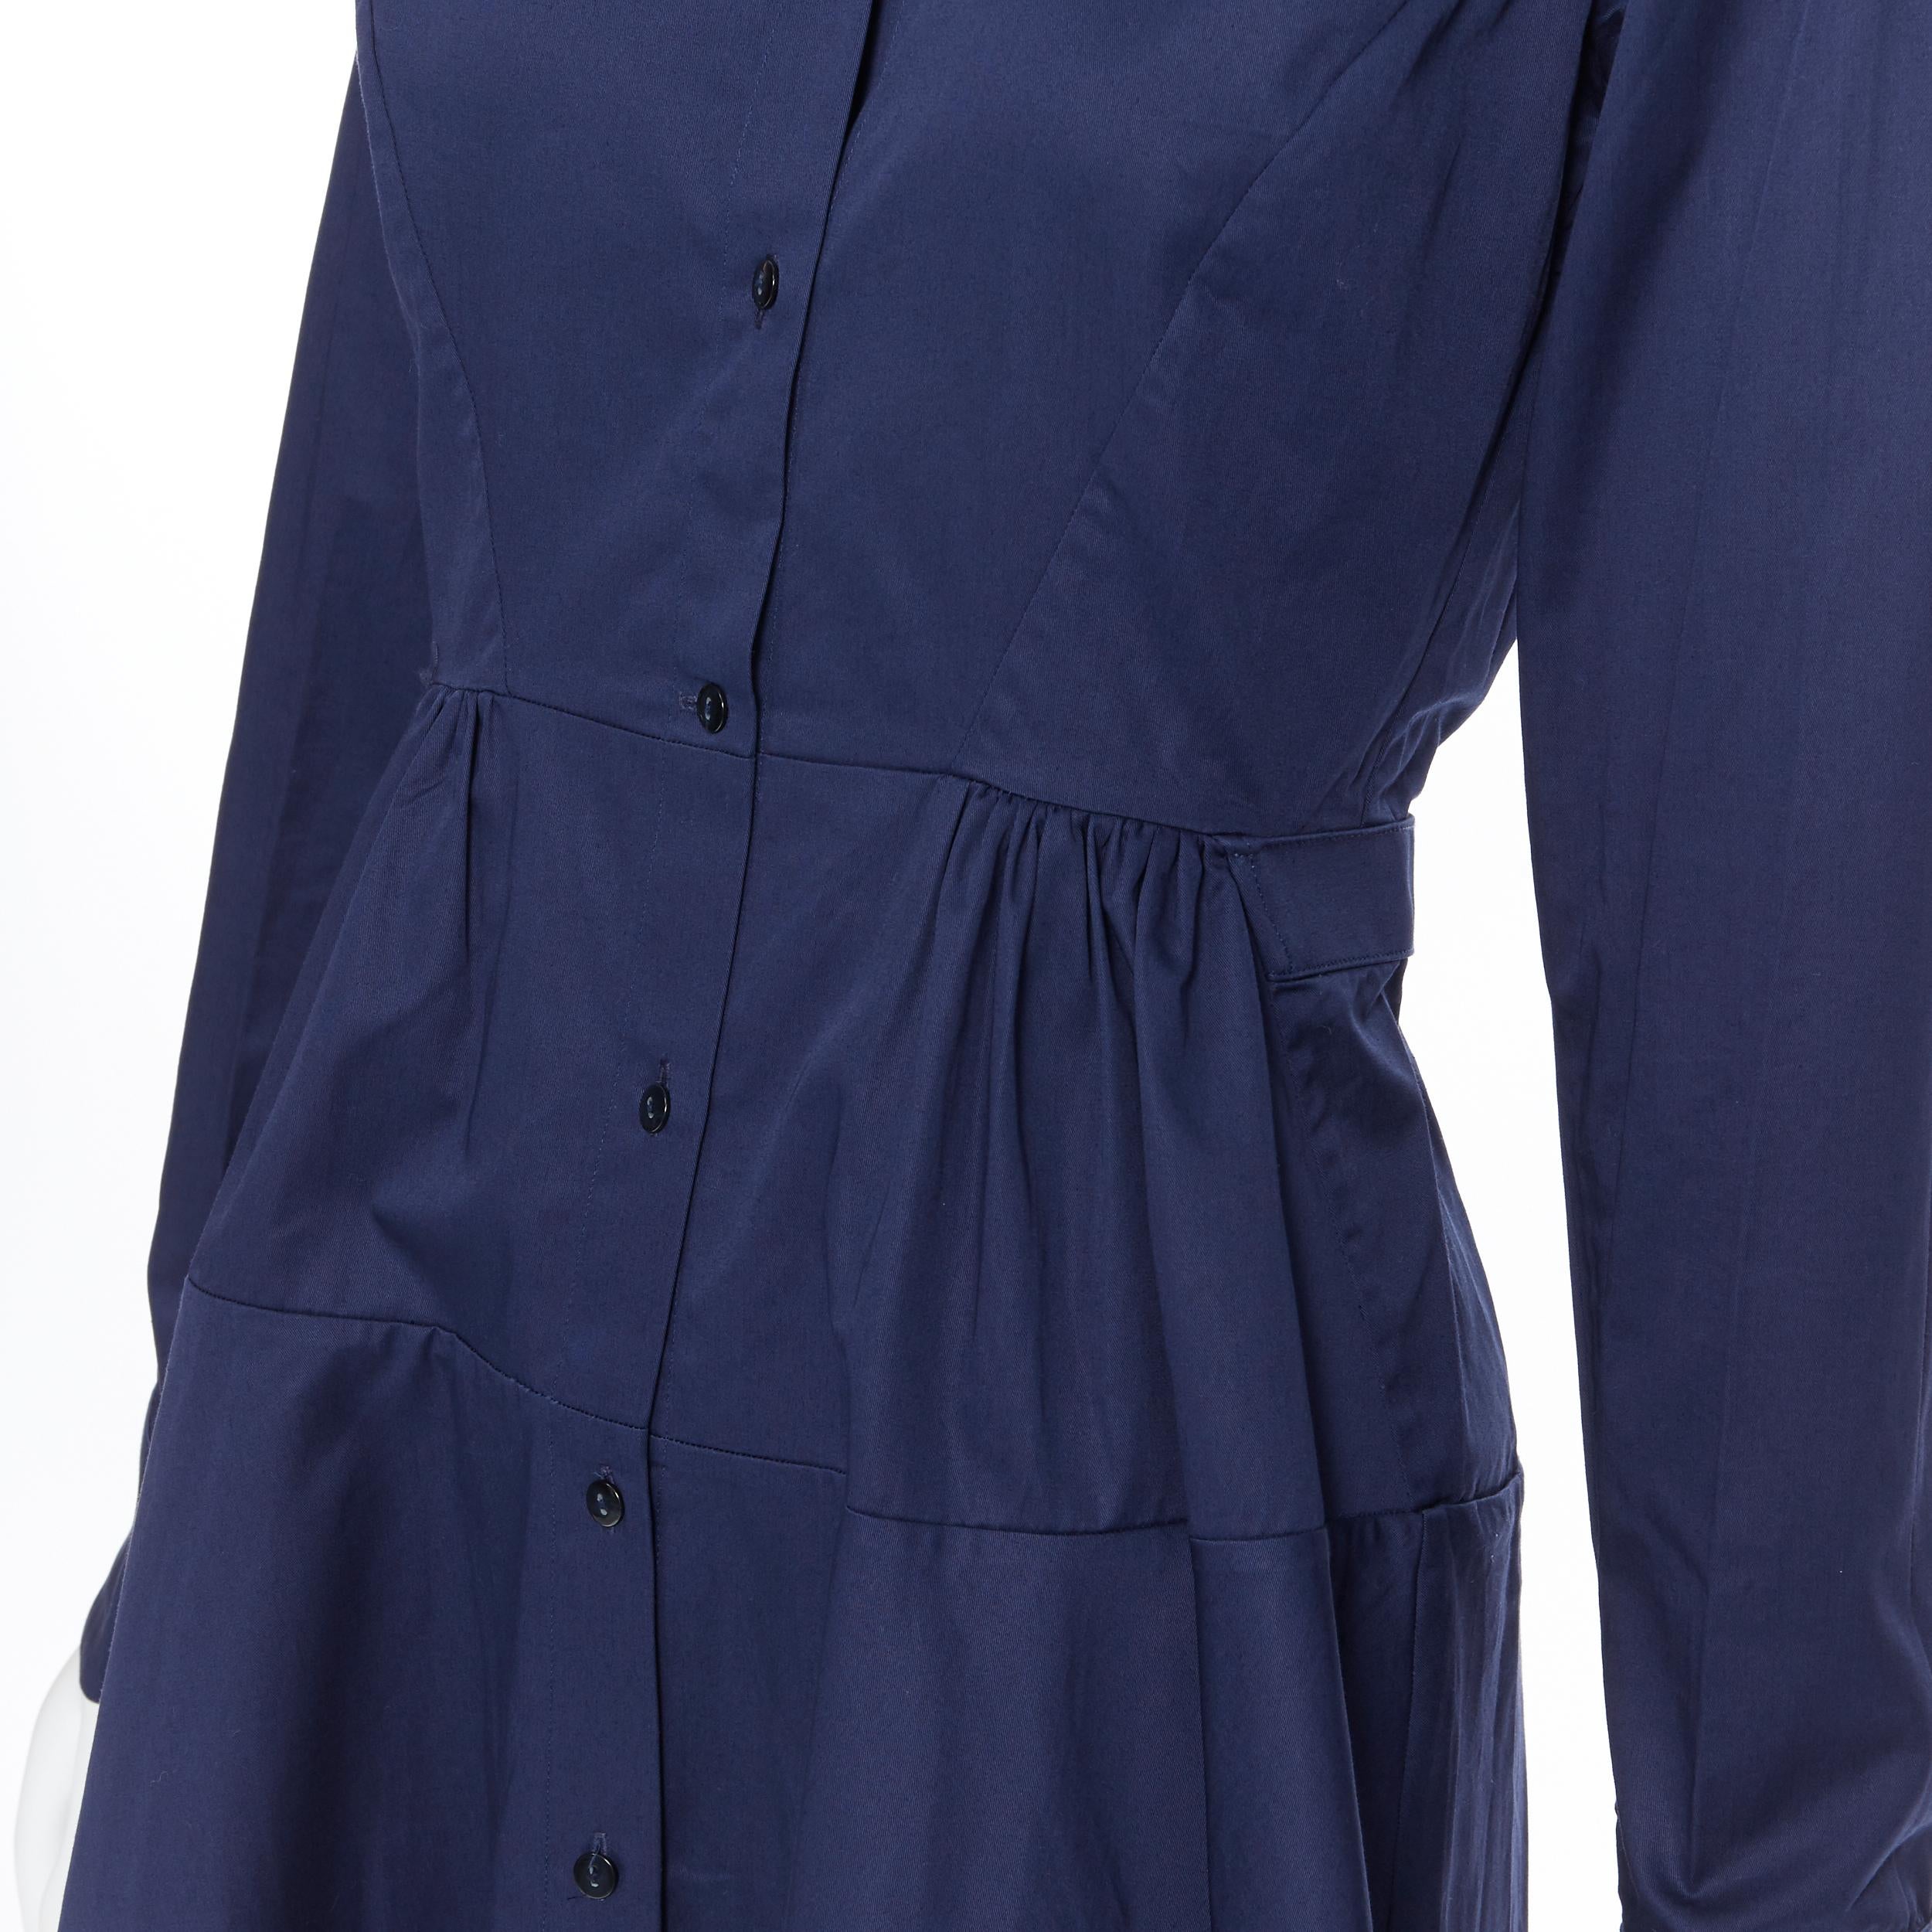 PALMER HARDING 100% cotton navy blue fit flare casual cotton dress UK8 XS
Brand: Palmer Harding
Model Name / Style: Cotton dress
Material: Cotton
Color: Navy
Pattern: Solid
Closure: Button
Extra Detail: Contoured seams at bust. Shirred pleating at